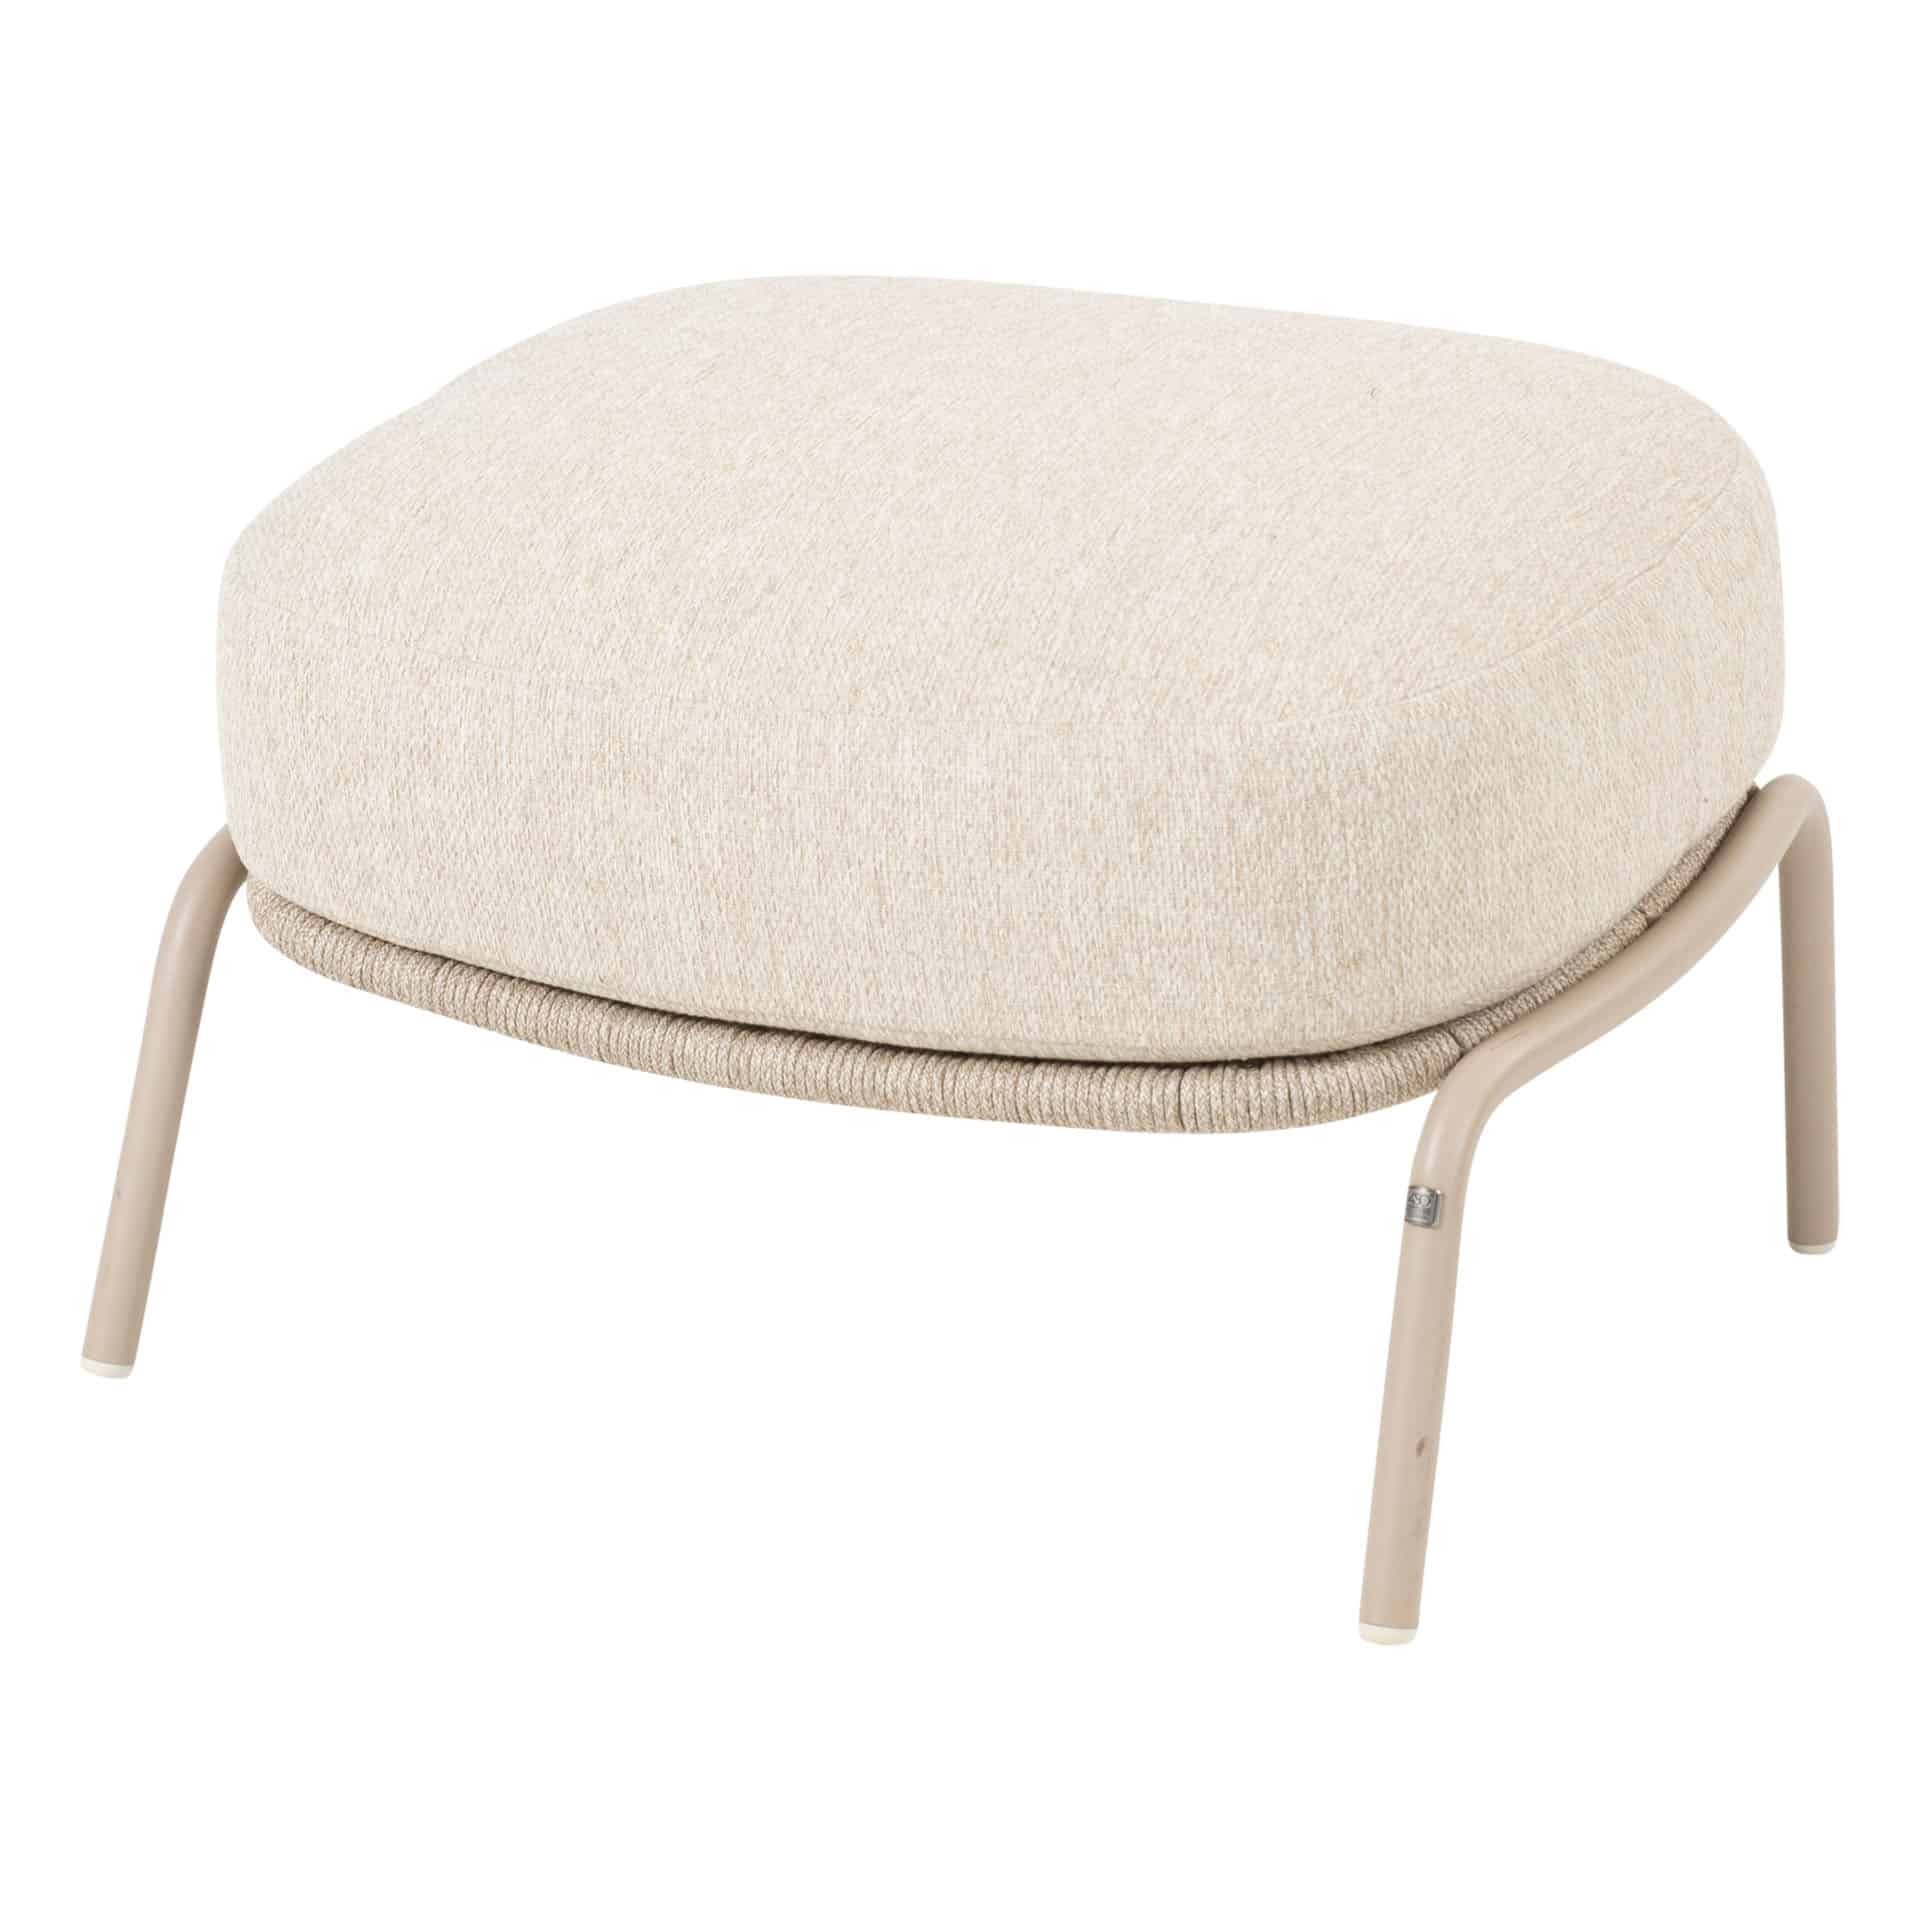 213938_-Puccini-footstool-latte-with-cushion-01